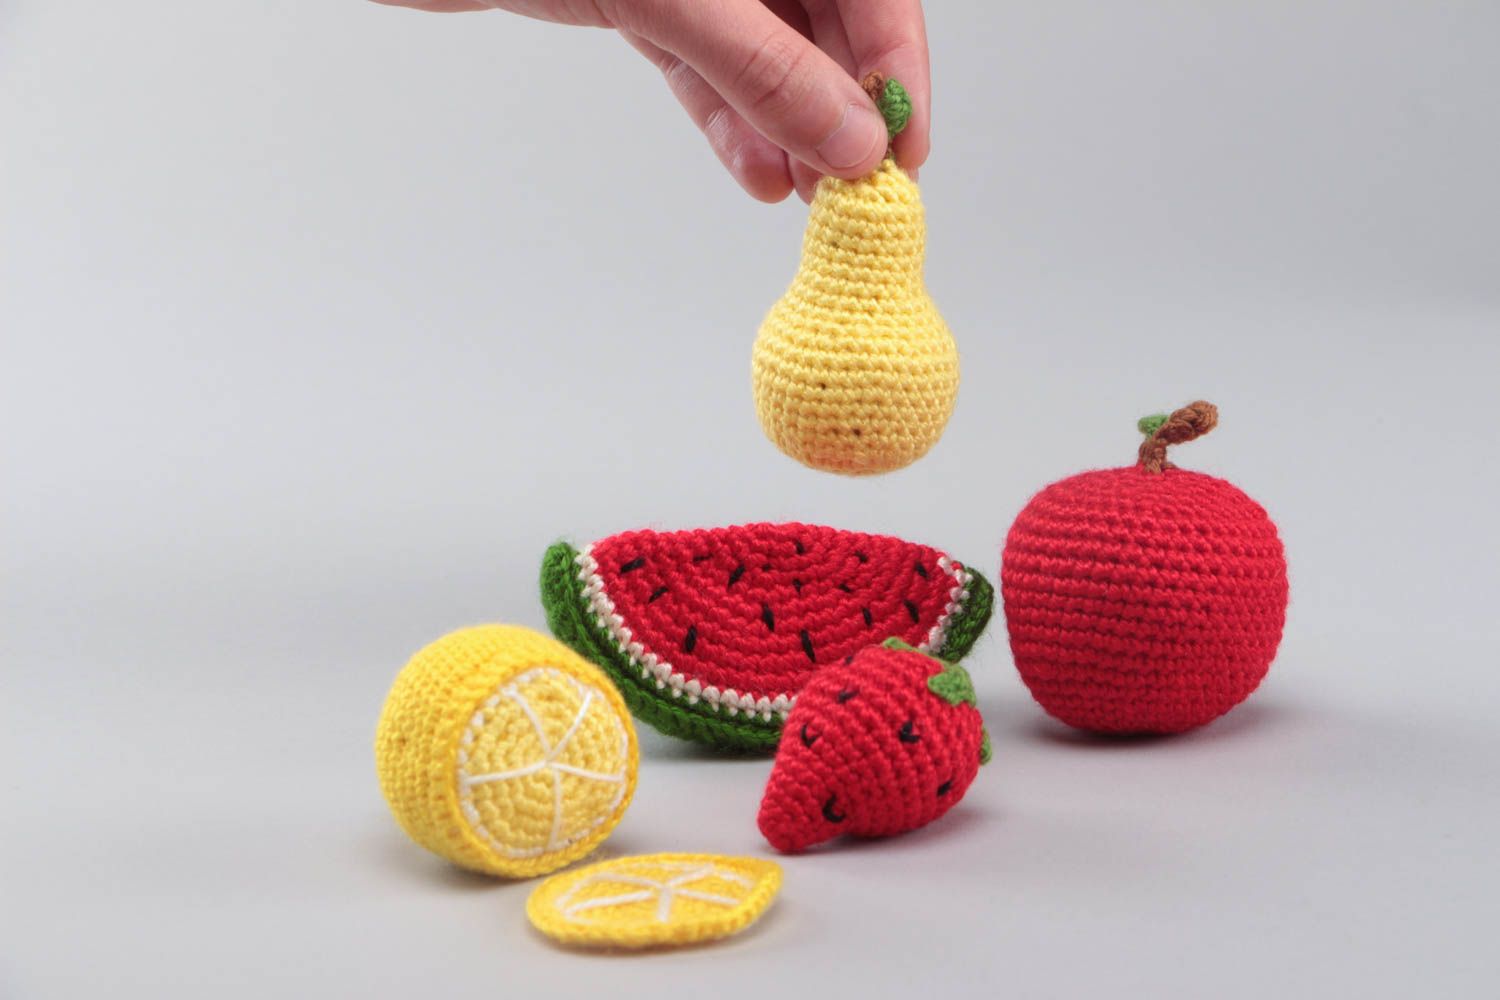 Set of 6 handmade crocheted soft colorful fruit toys for kids and interior decor photo 5